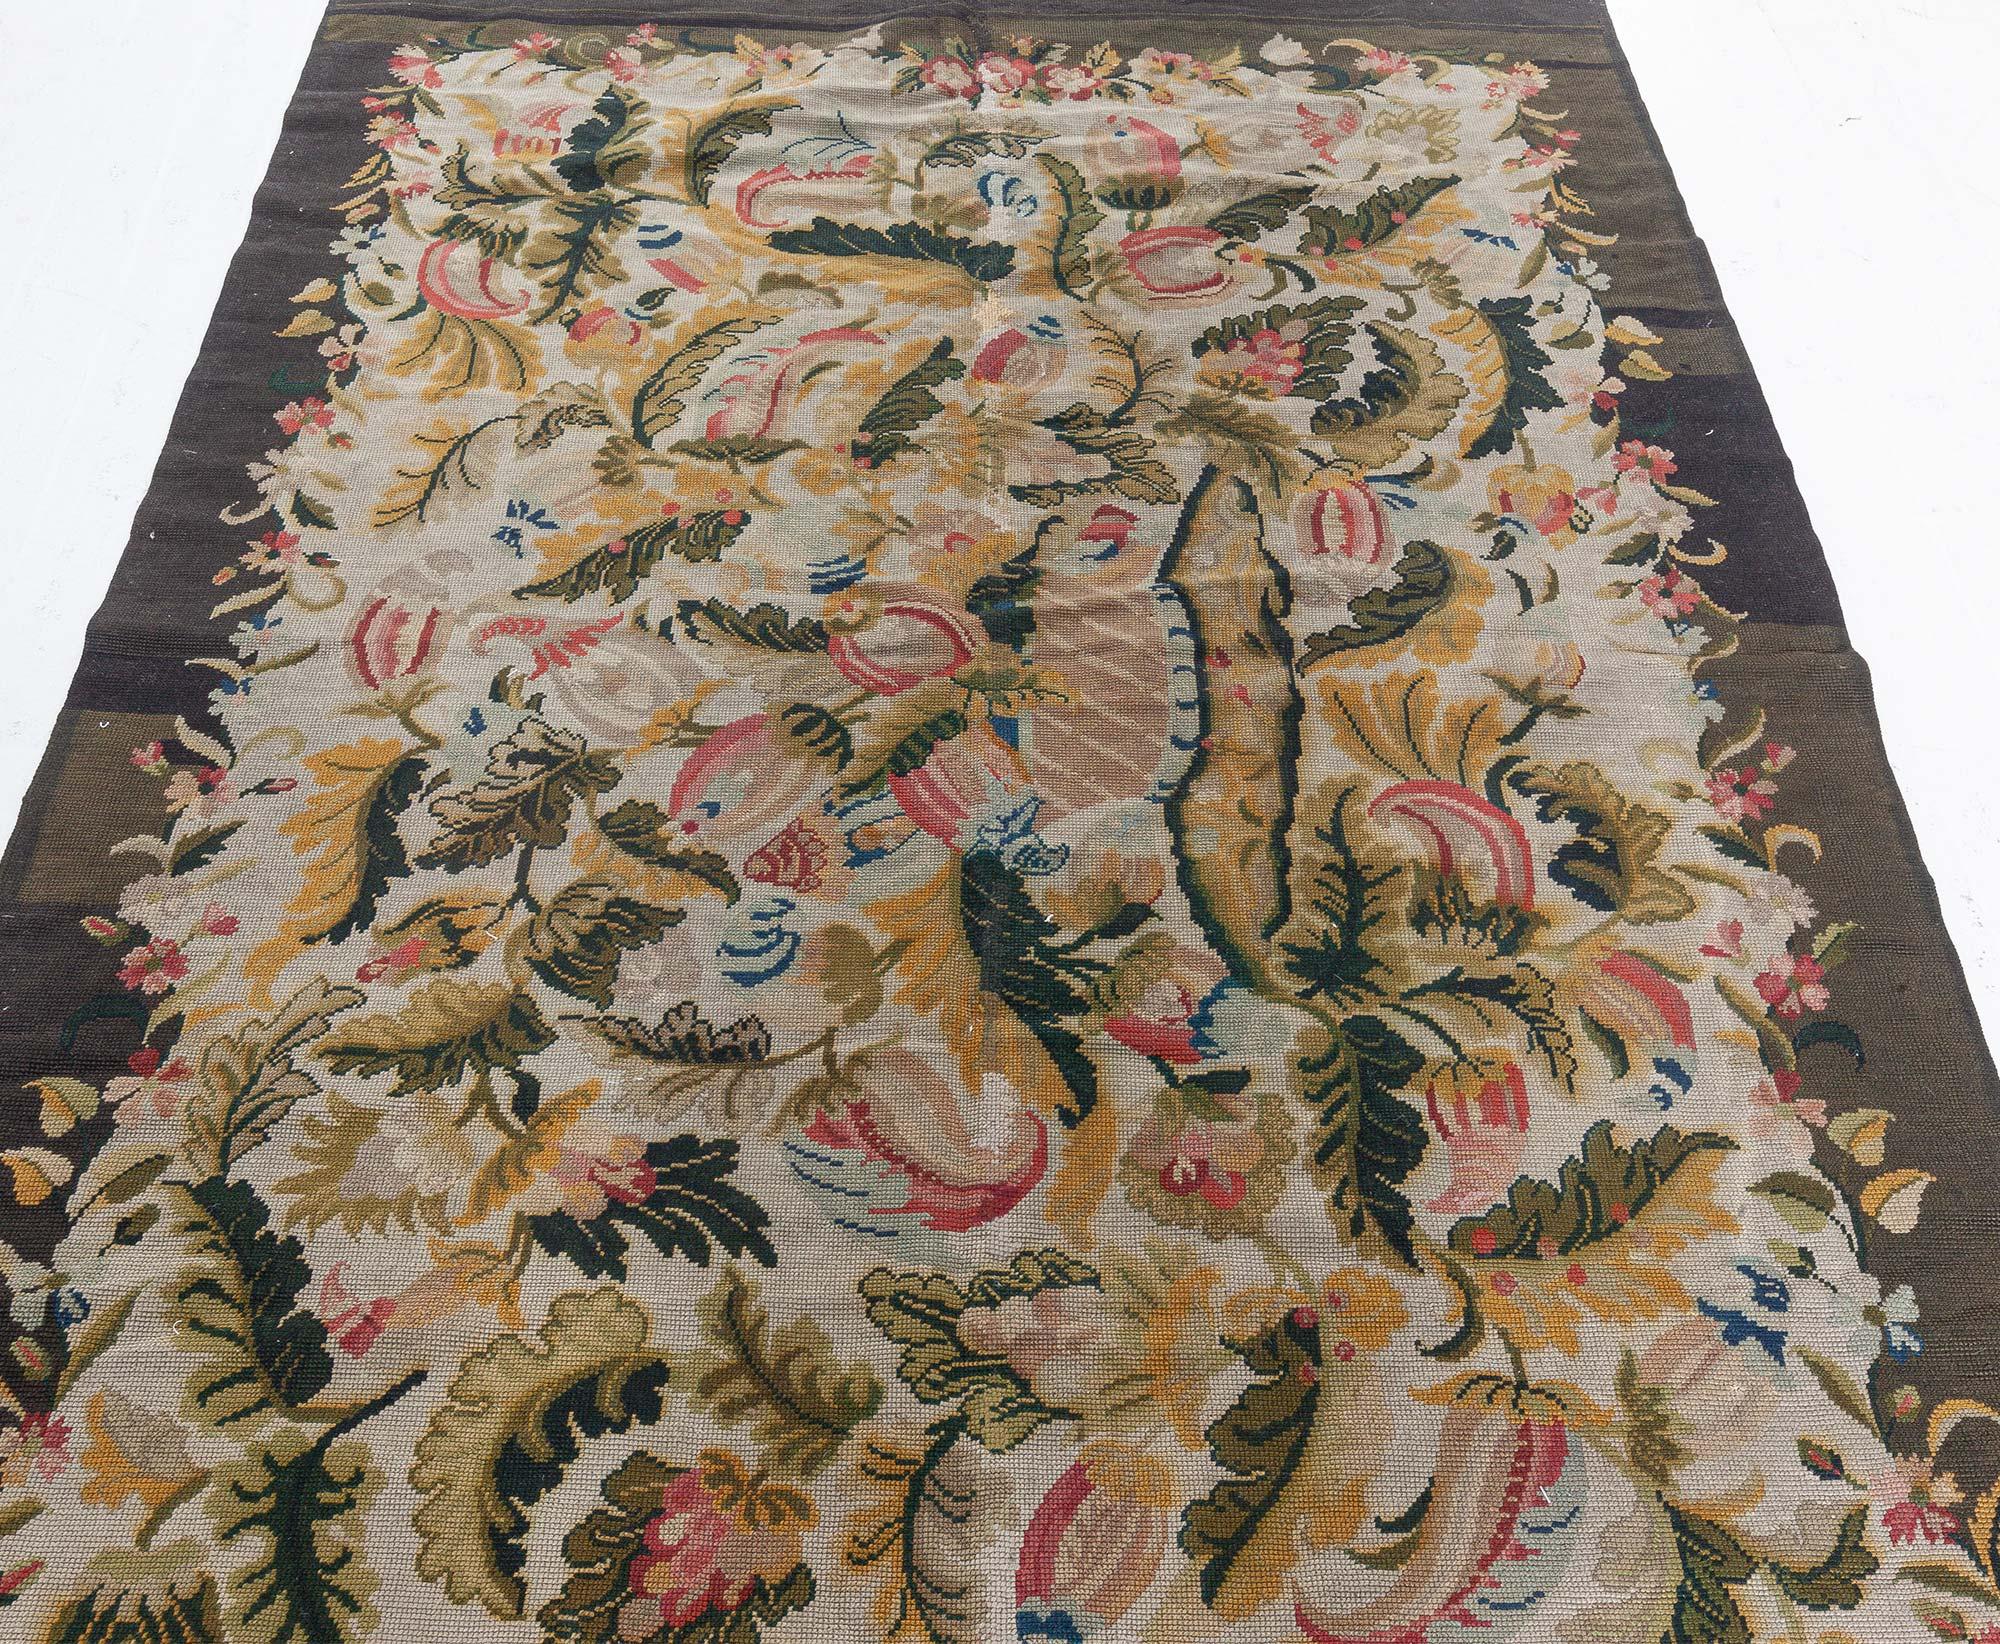 Early 20th Century English Needle Point Rug
Size: 4'1